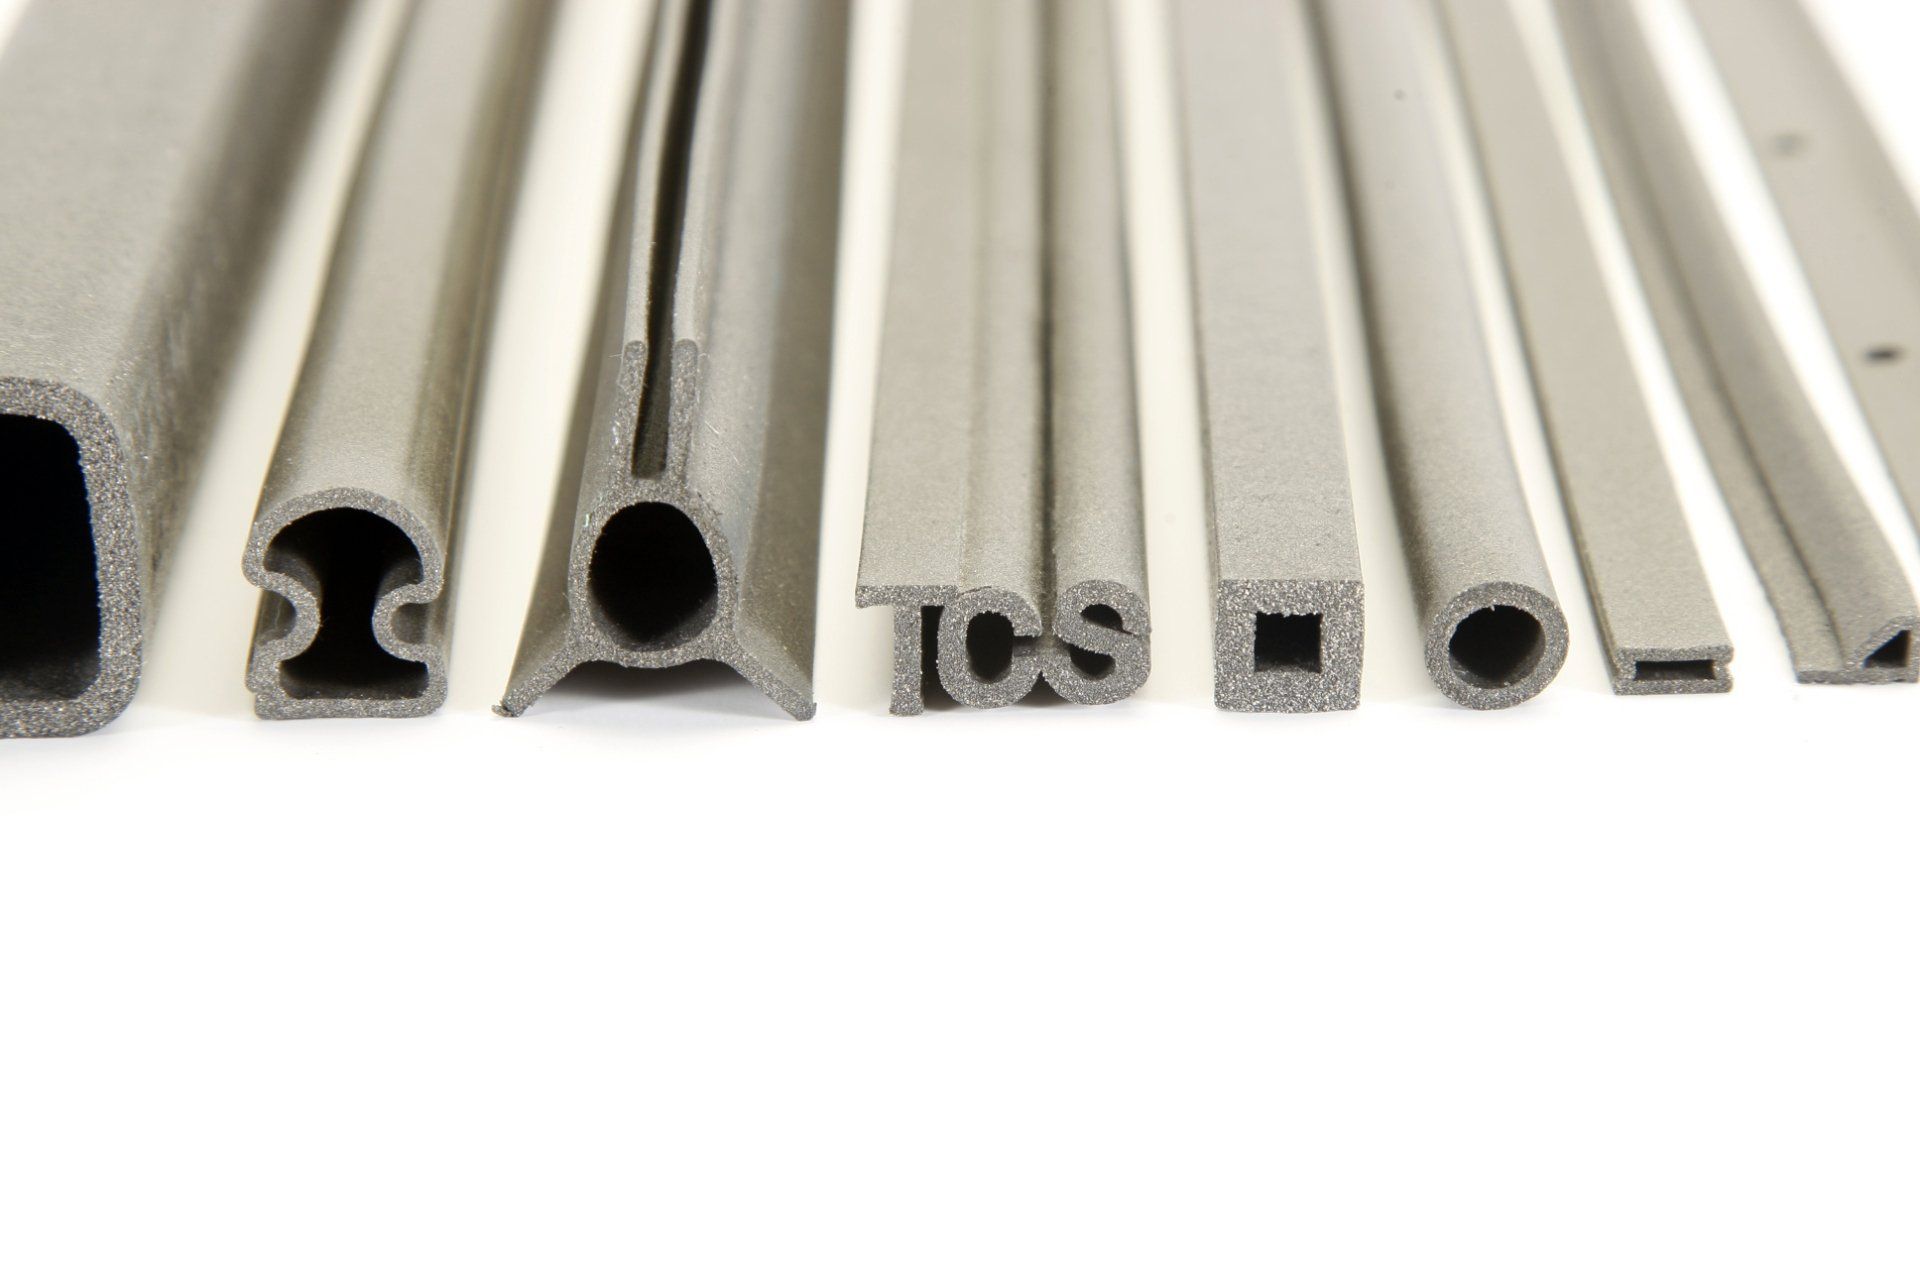 Extruded profiles,  Standard profiles,  Duo-seal,  Flame retardant,  Miniature o-rings,  TC Shielding,  TCS,  Conductive elastomer specialists,  Herefordshire,  conductive silicone manufacturers